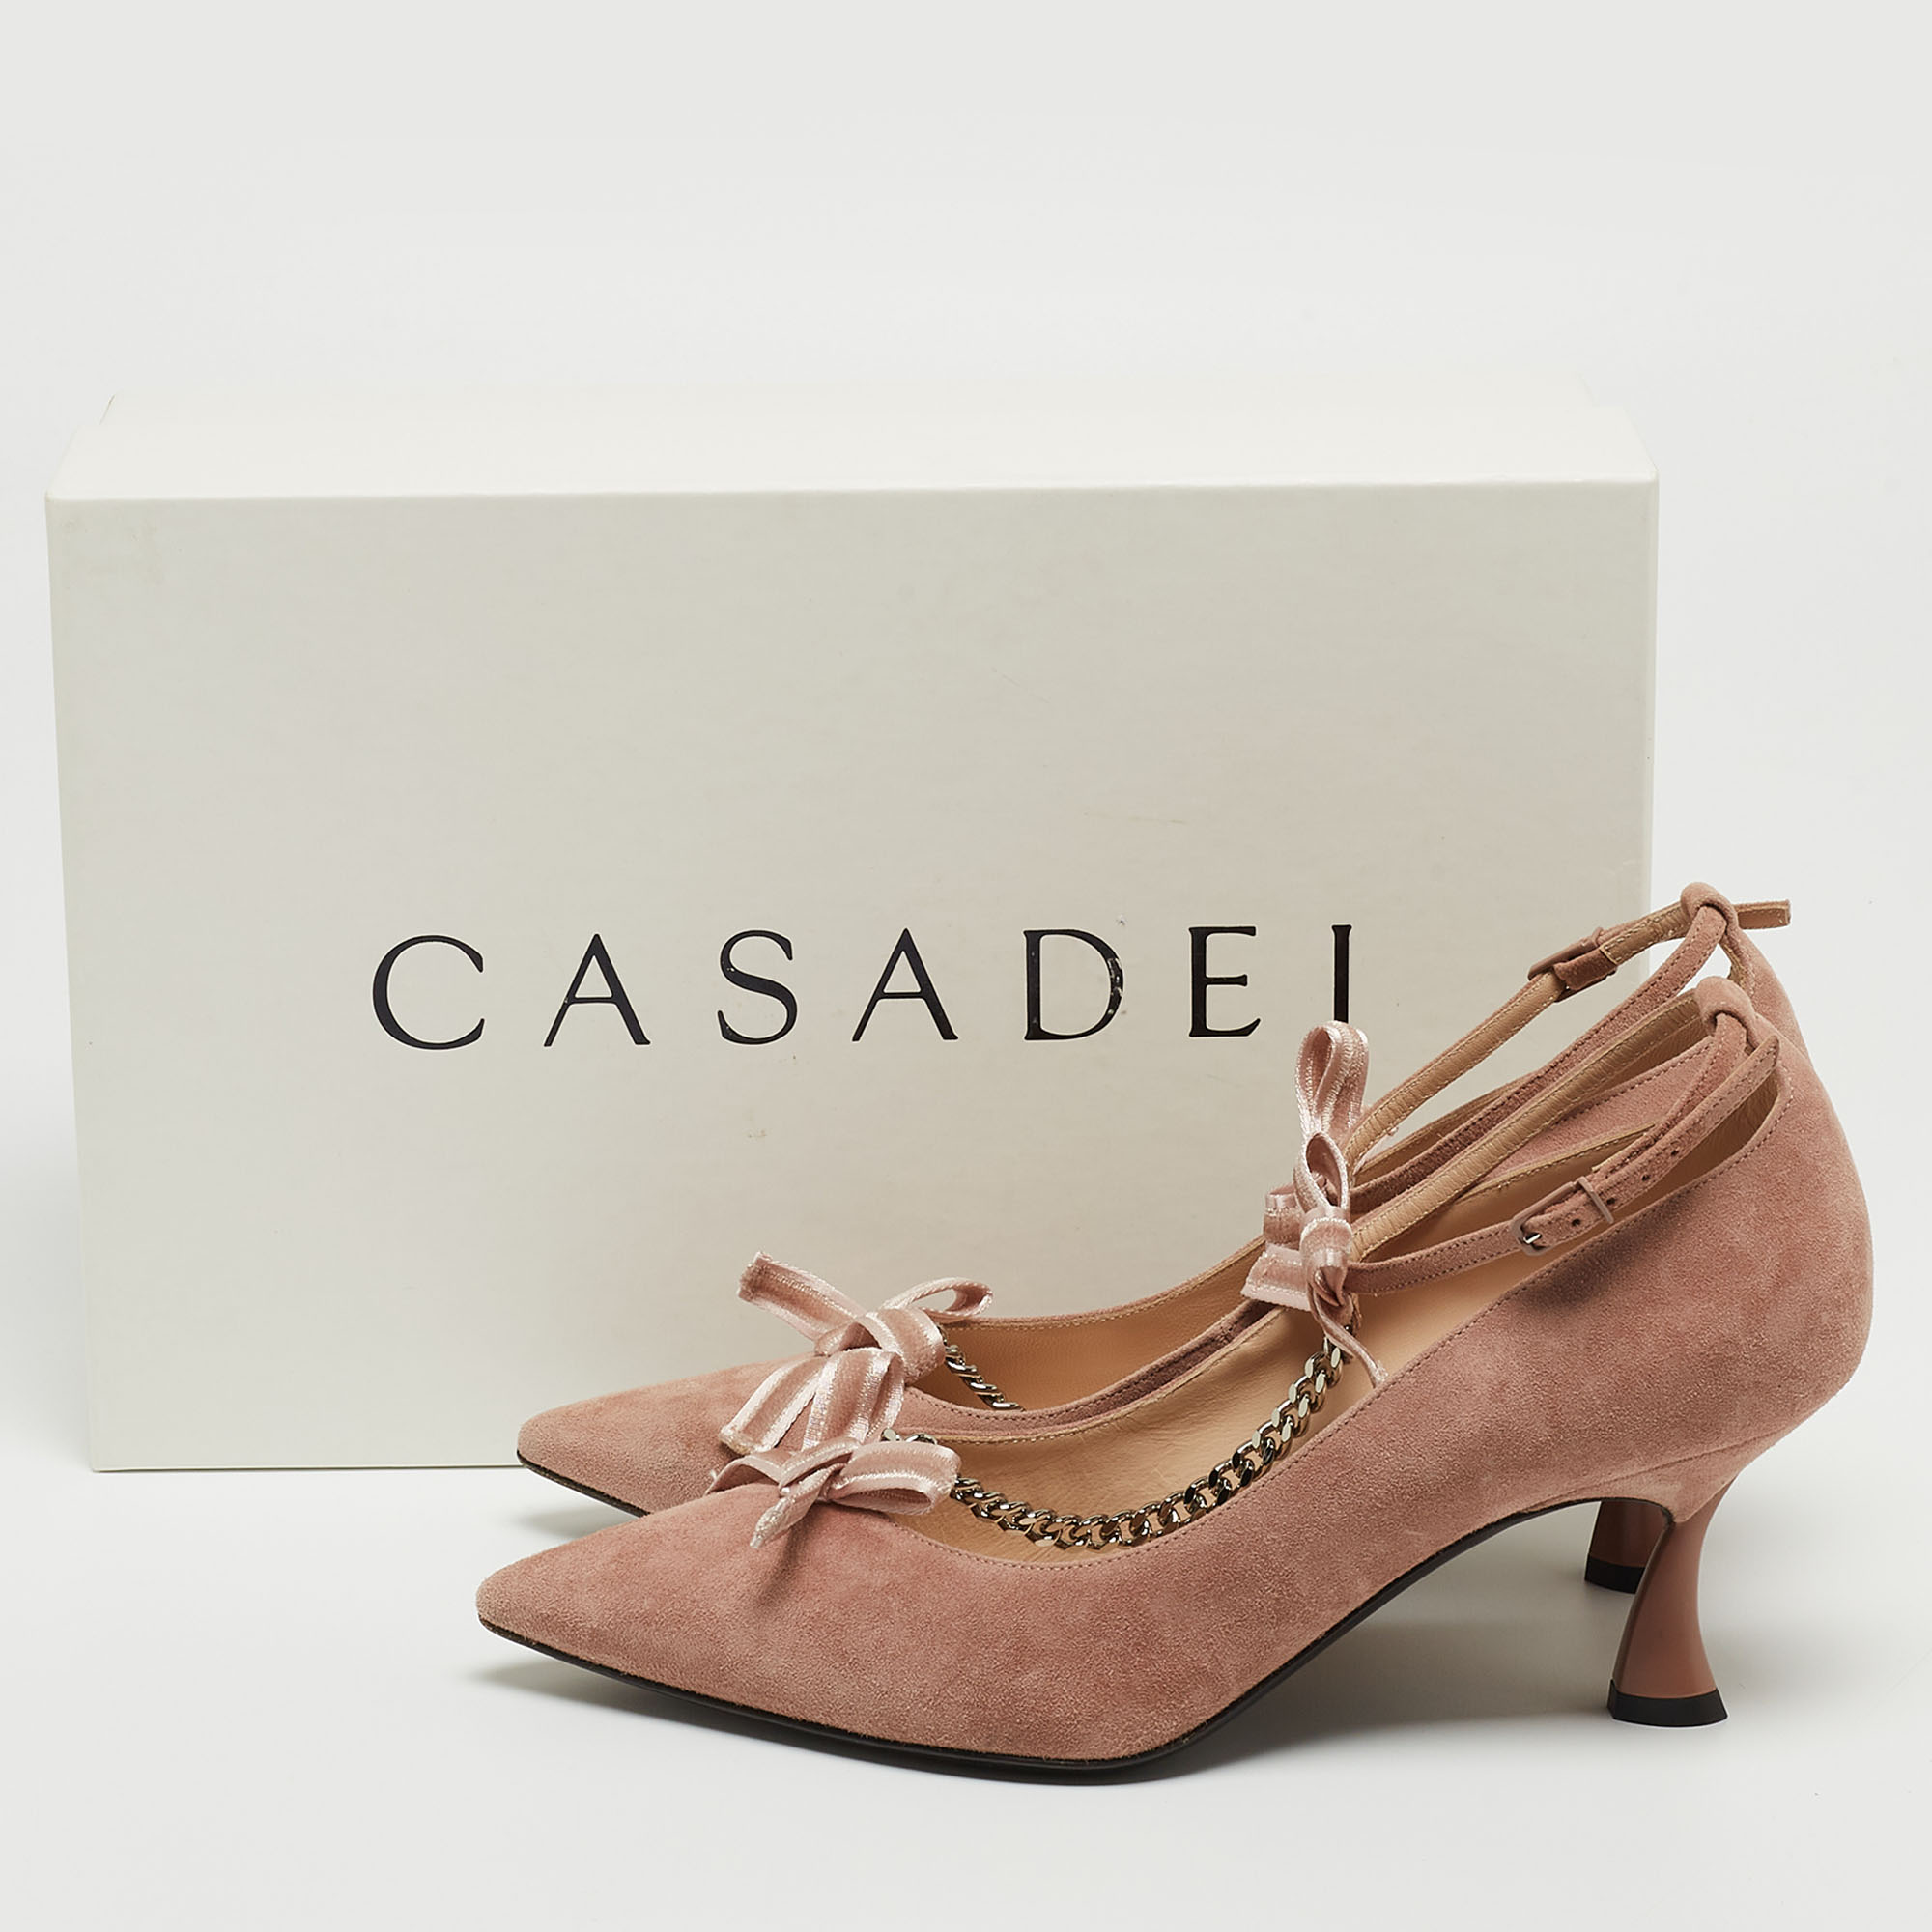 Casadei Pink Suede Chain T-Strap Bow Pointed Toe Pumps Size 37